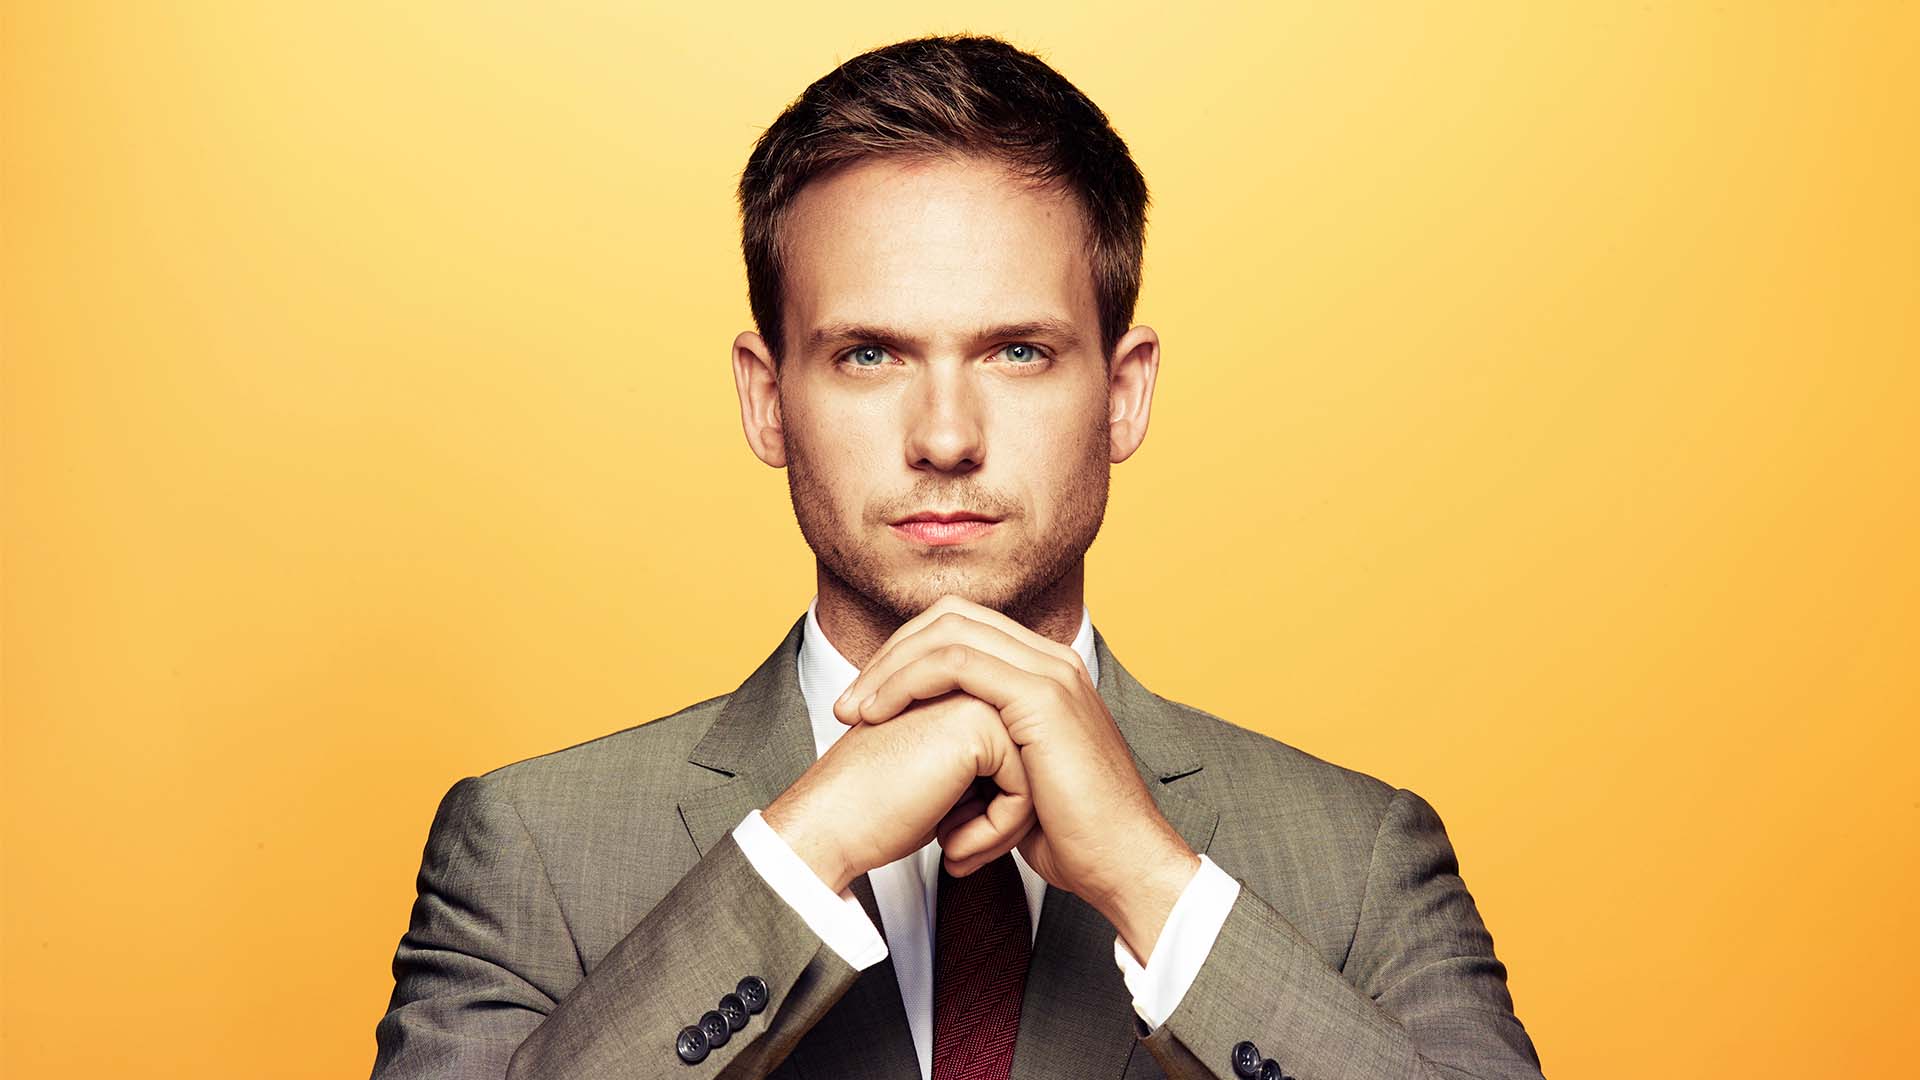 Suits Wallpapers, Pictures, Images